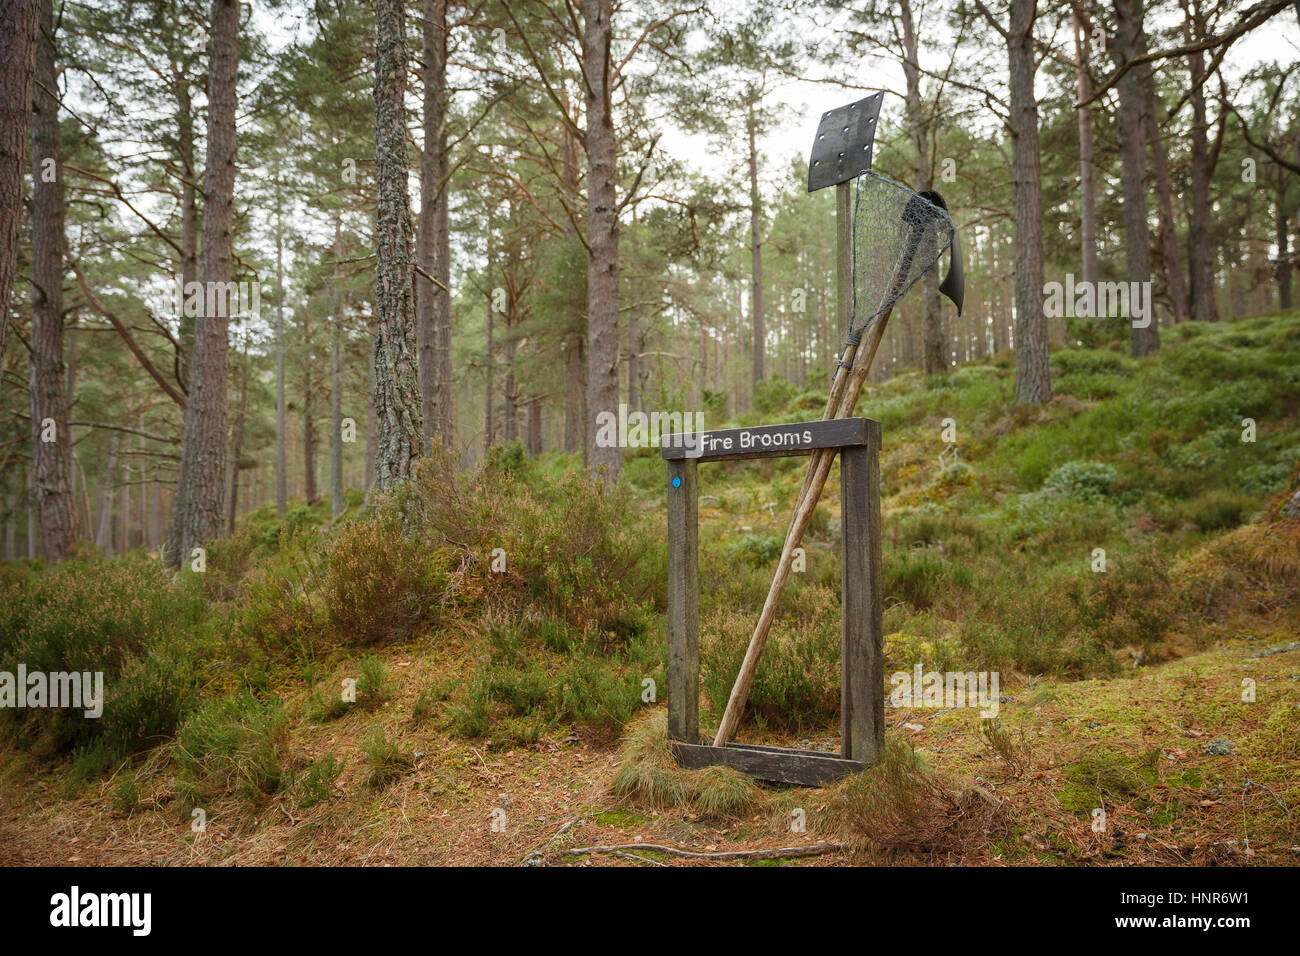 Fire equipment in a woodland forest Stock Photo